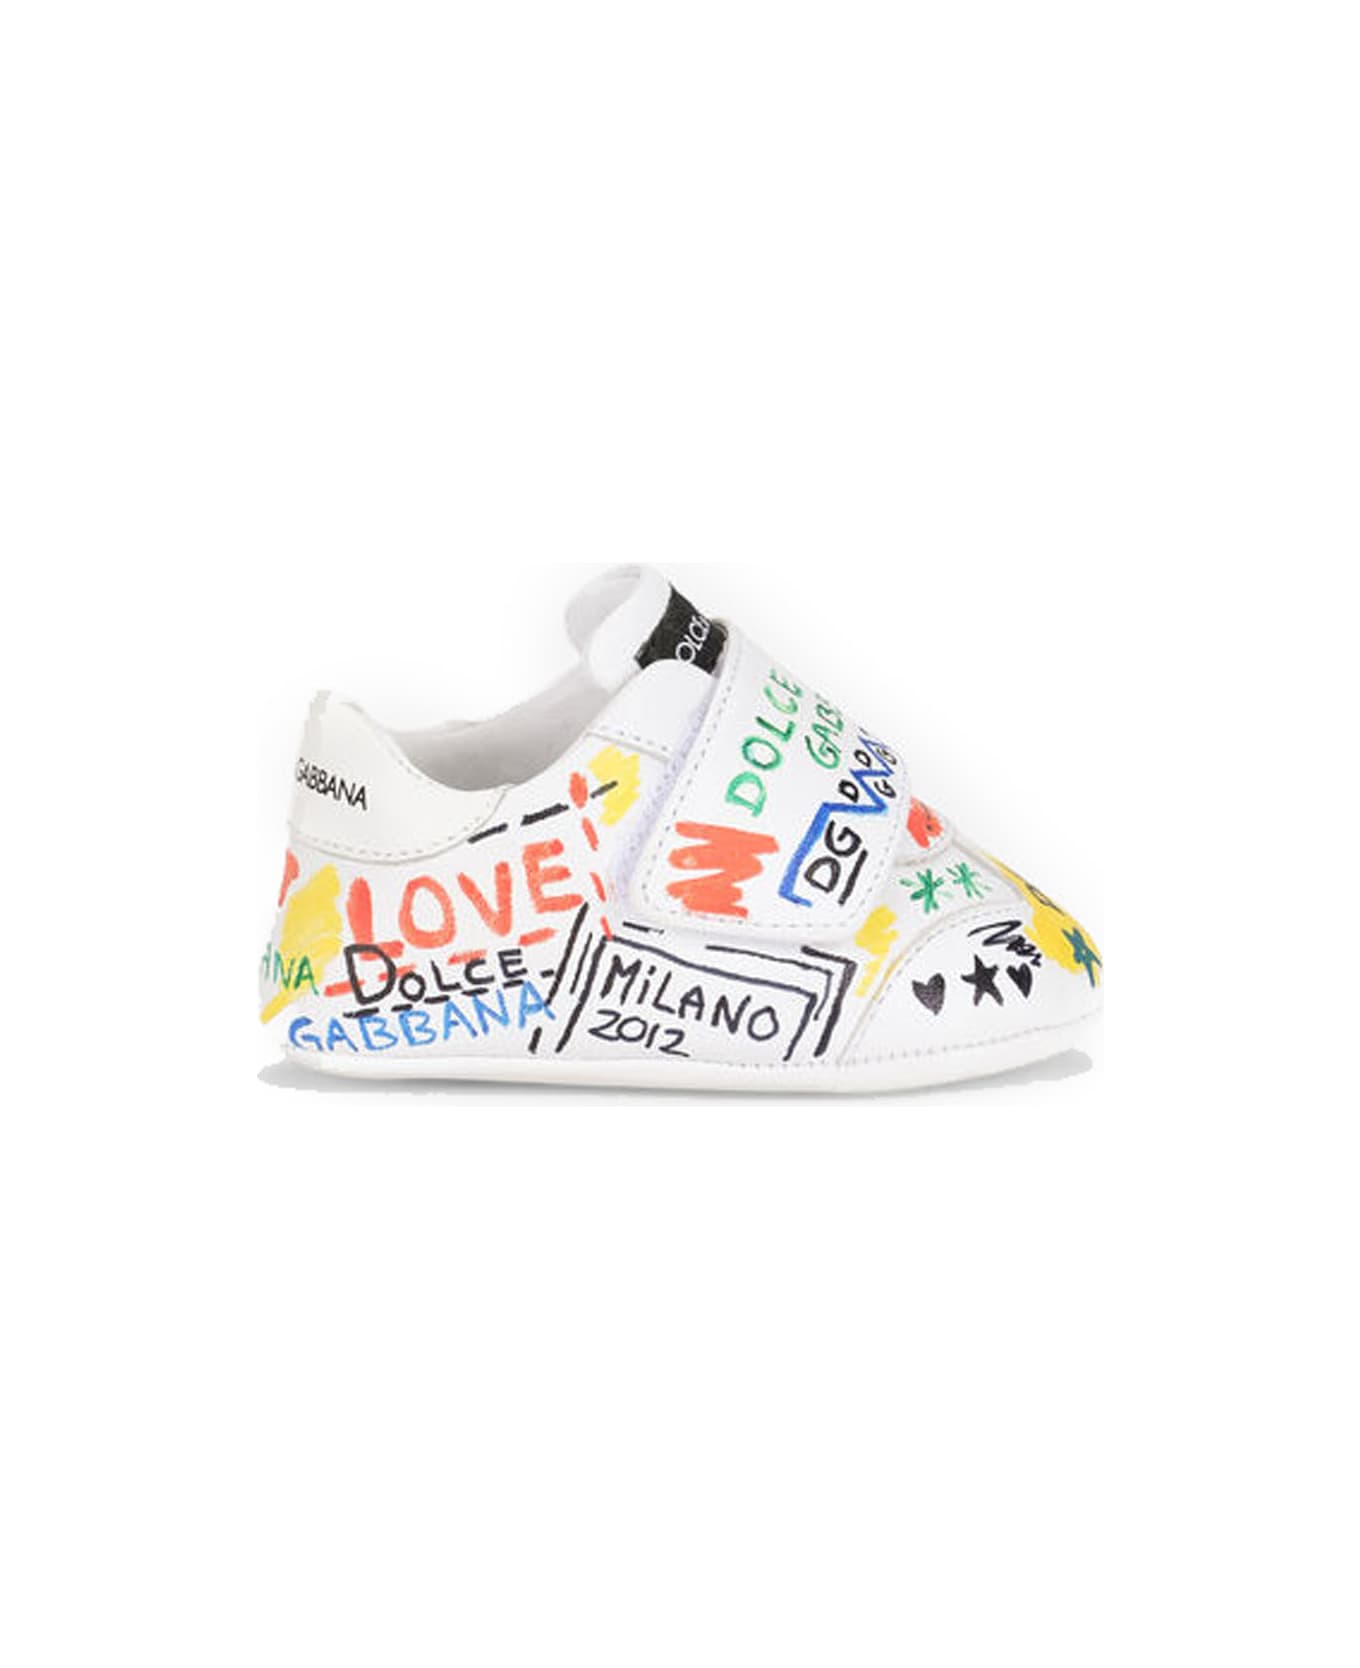 Dolce & Gabbana Strap Sneakers With Written Print - Multicolor シューズ